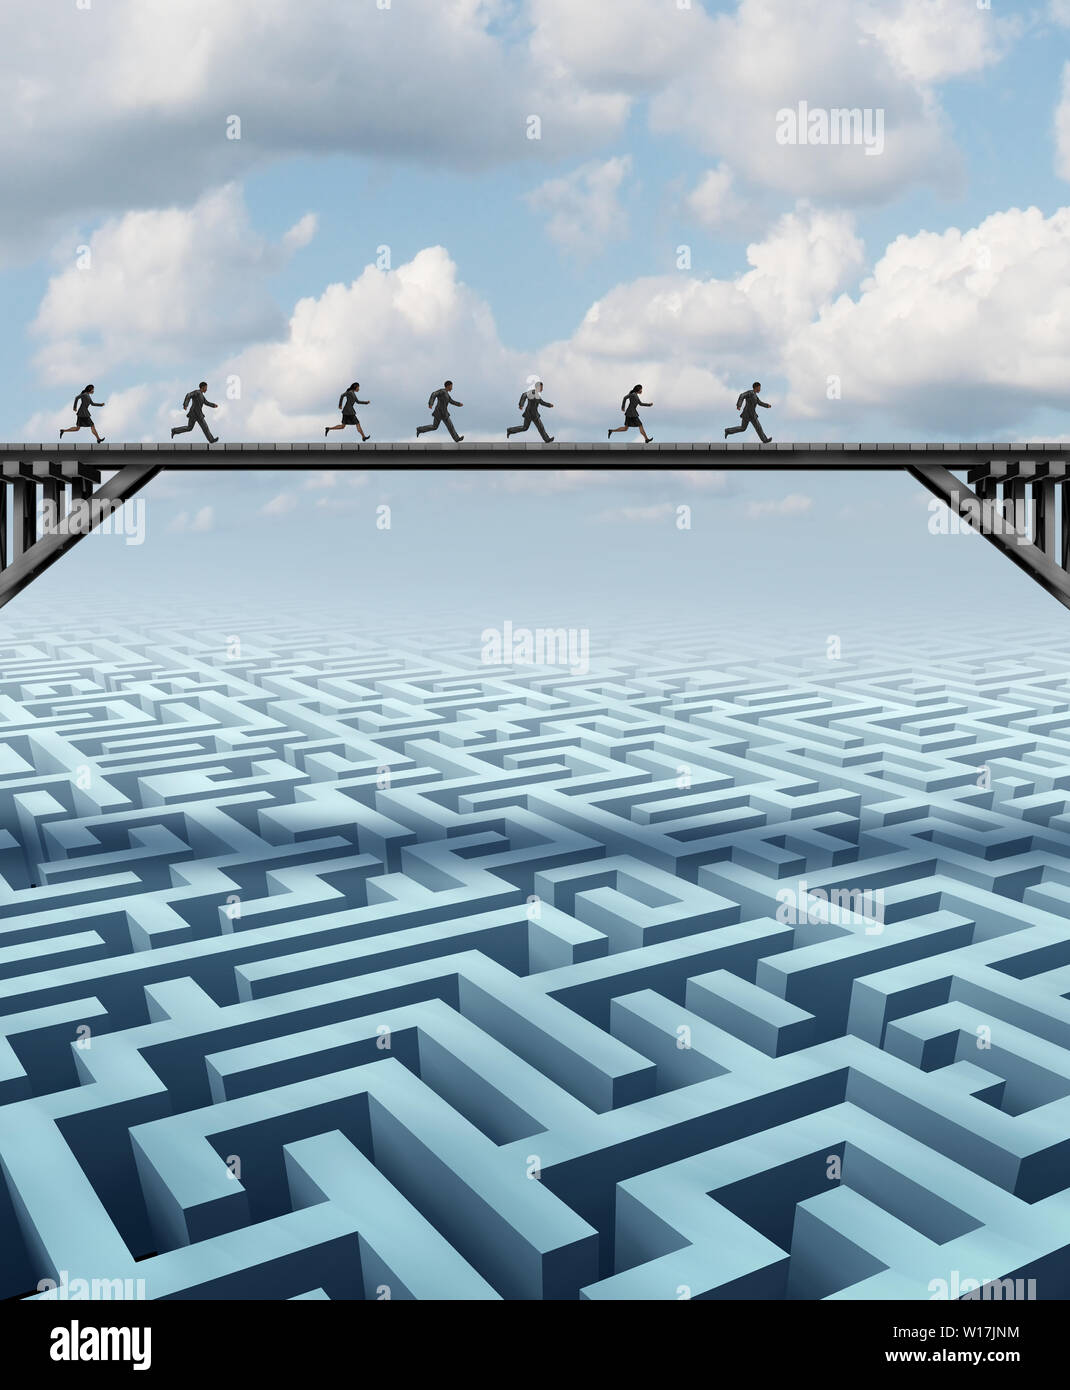 Corporate success concept to rise above challenges of business and life with businesspeople crossing a bridge over a confusing maze or labyrinth as a Stock Photo